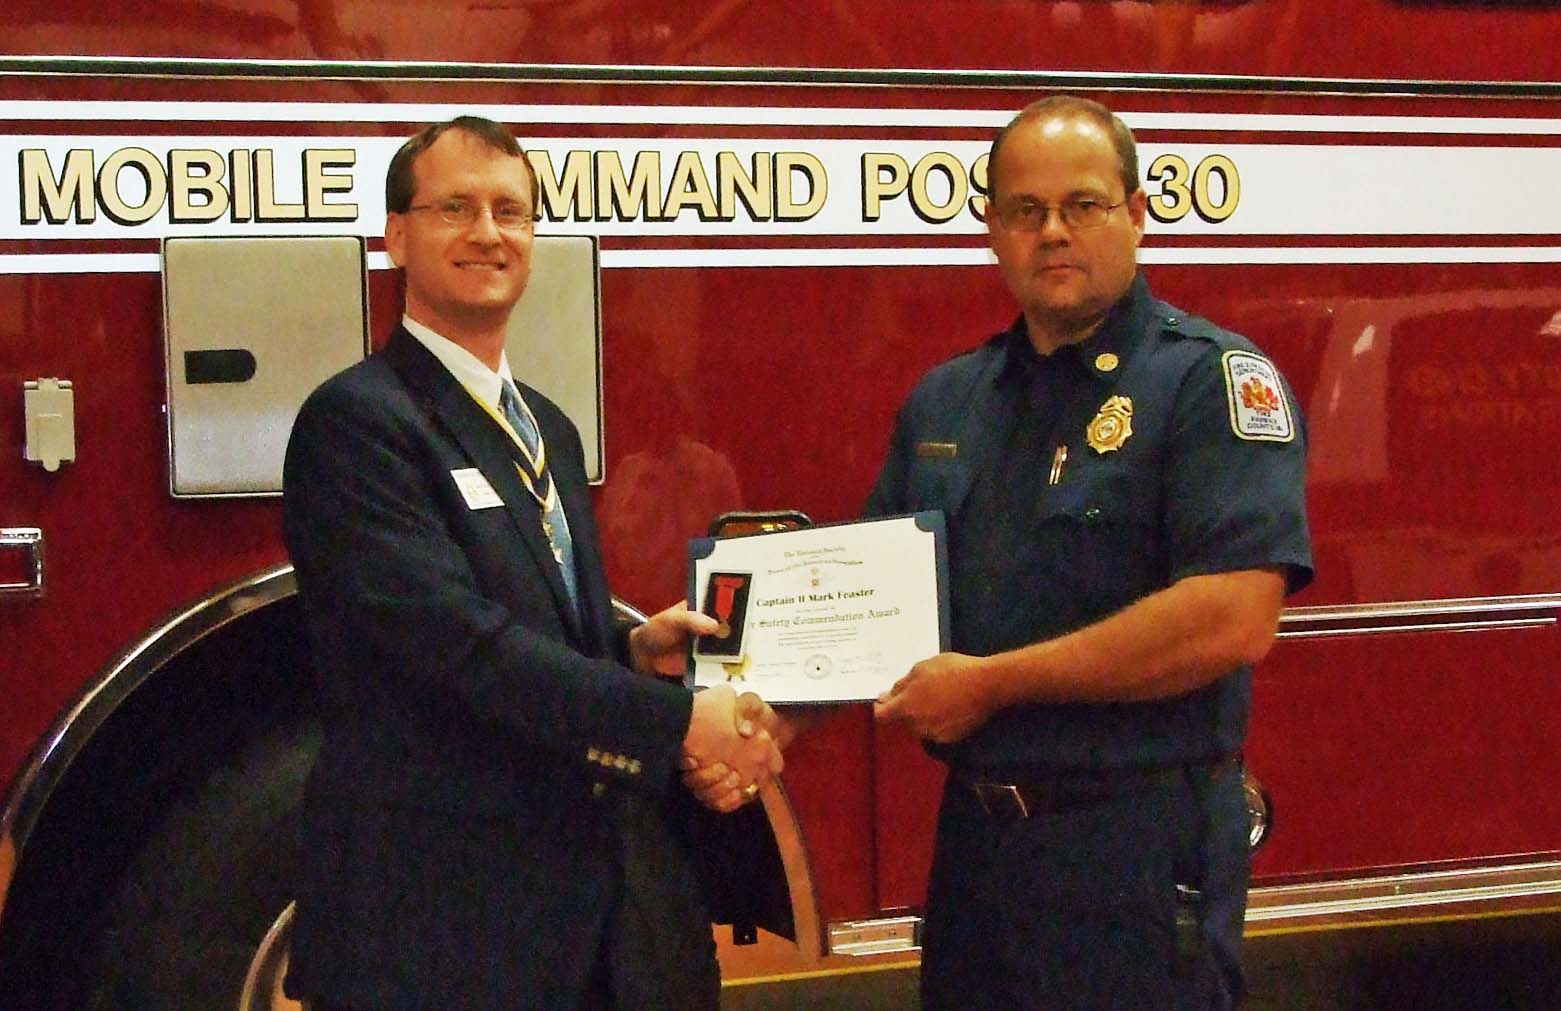 Mark Feaster receives the Fairfax Resolves Fire Safety Commendation from Chapter President Darrin Schmidt. The station's mobile command post vehicle serves as a backdrop.